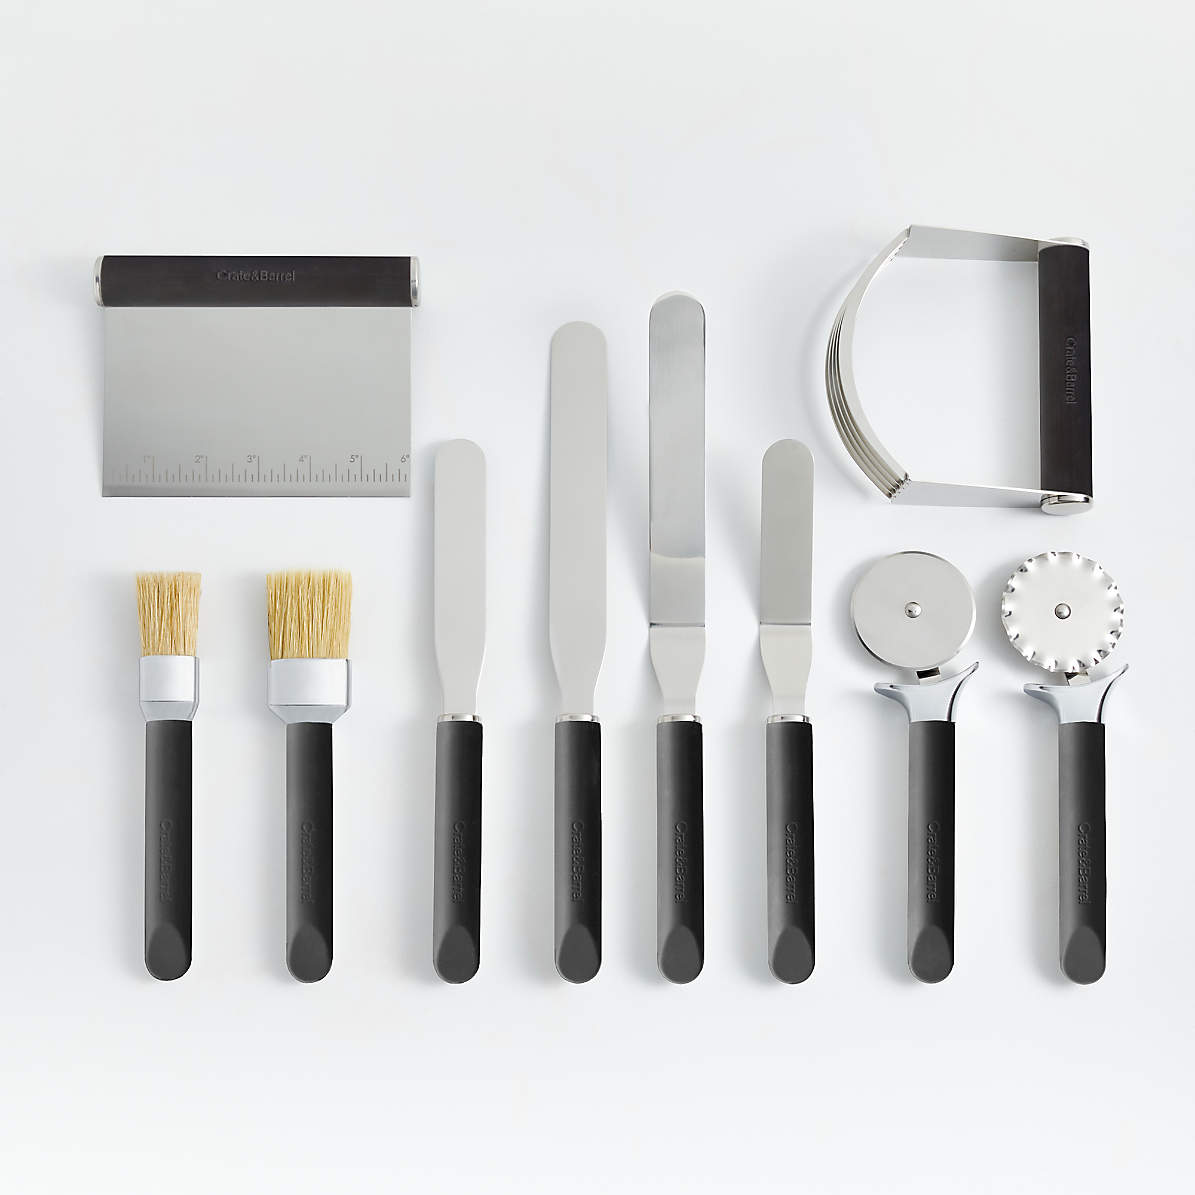 Crate & Barrel 10-Piece Soft-Touch Pastry Tools Set